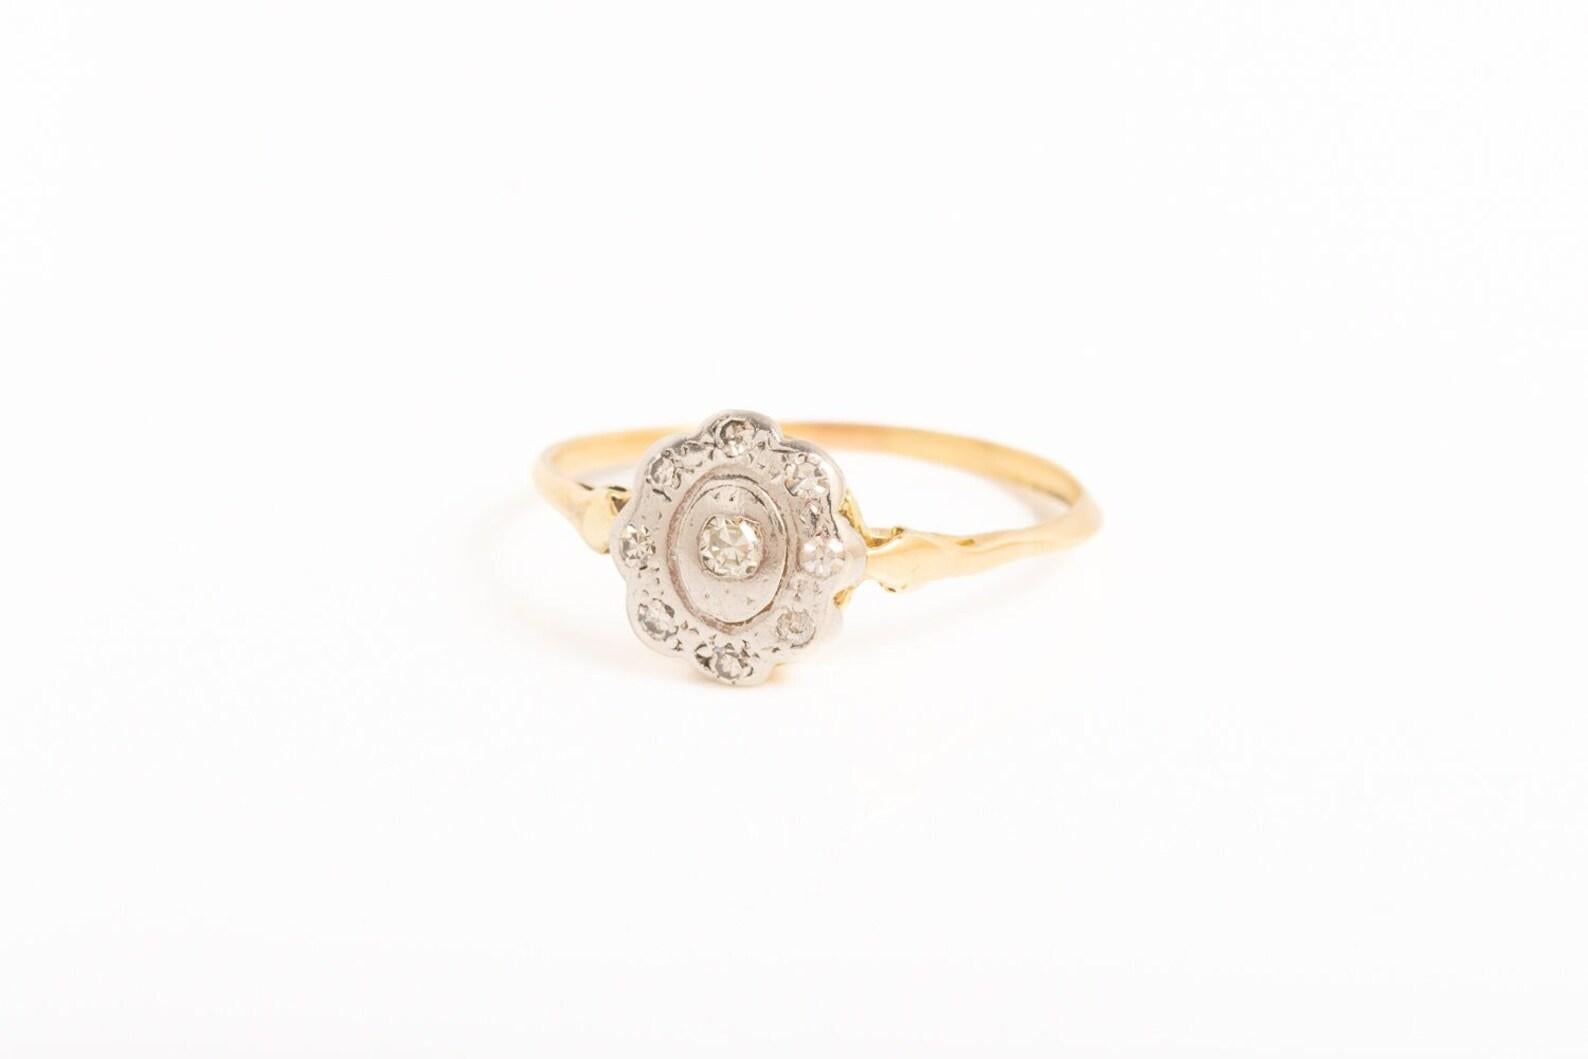 Antique Art Deco 18ct Gold Diamond Daisy Ring In Good Condition For Sale In Portland, England